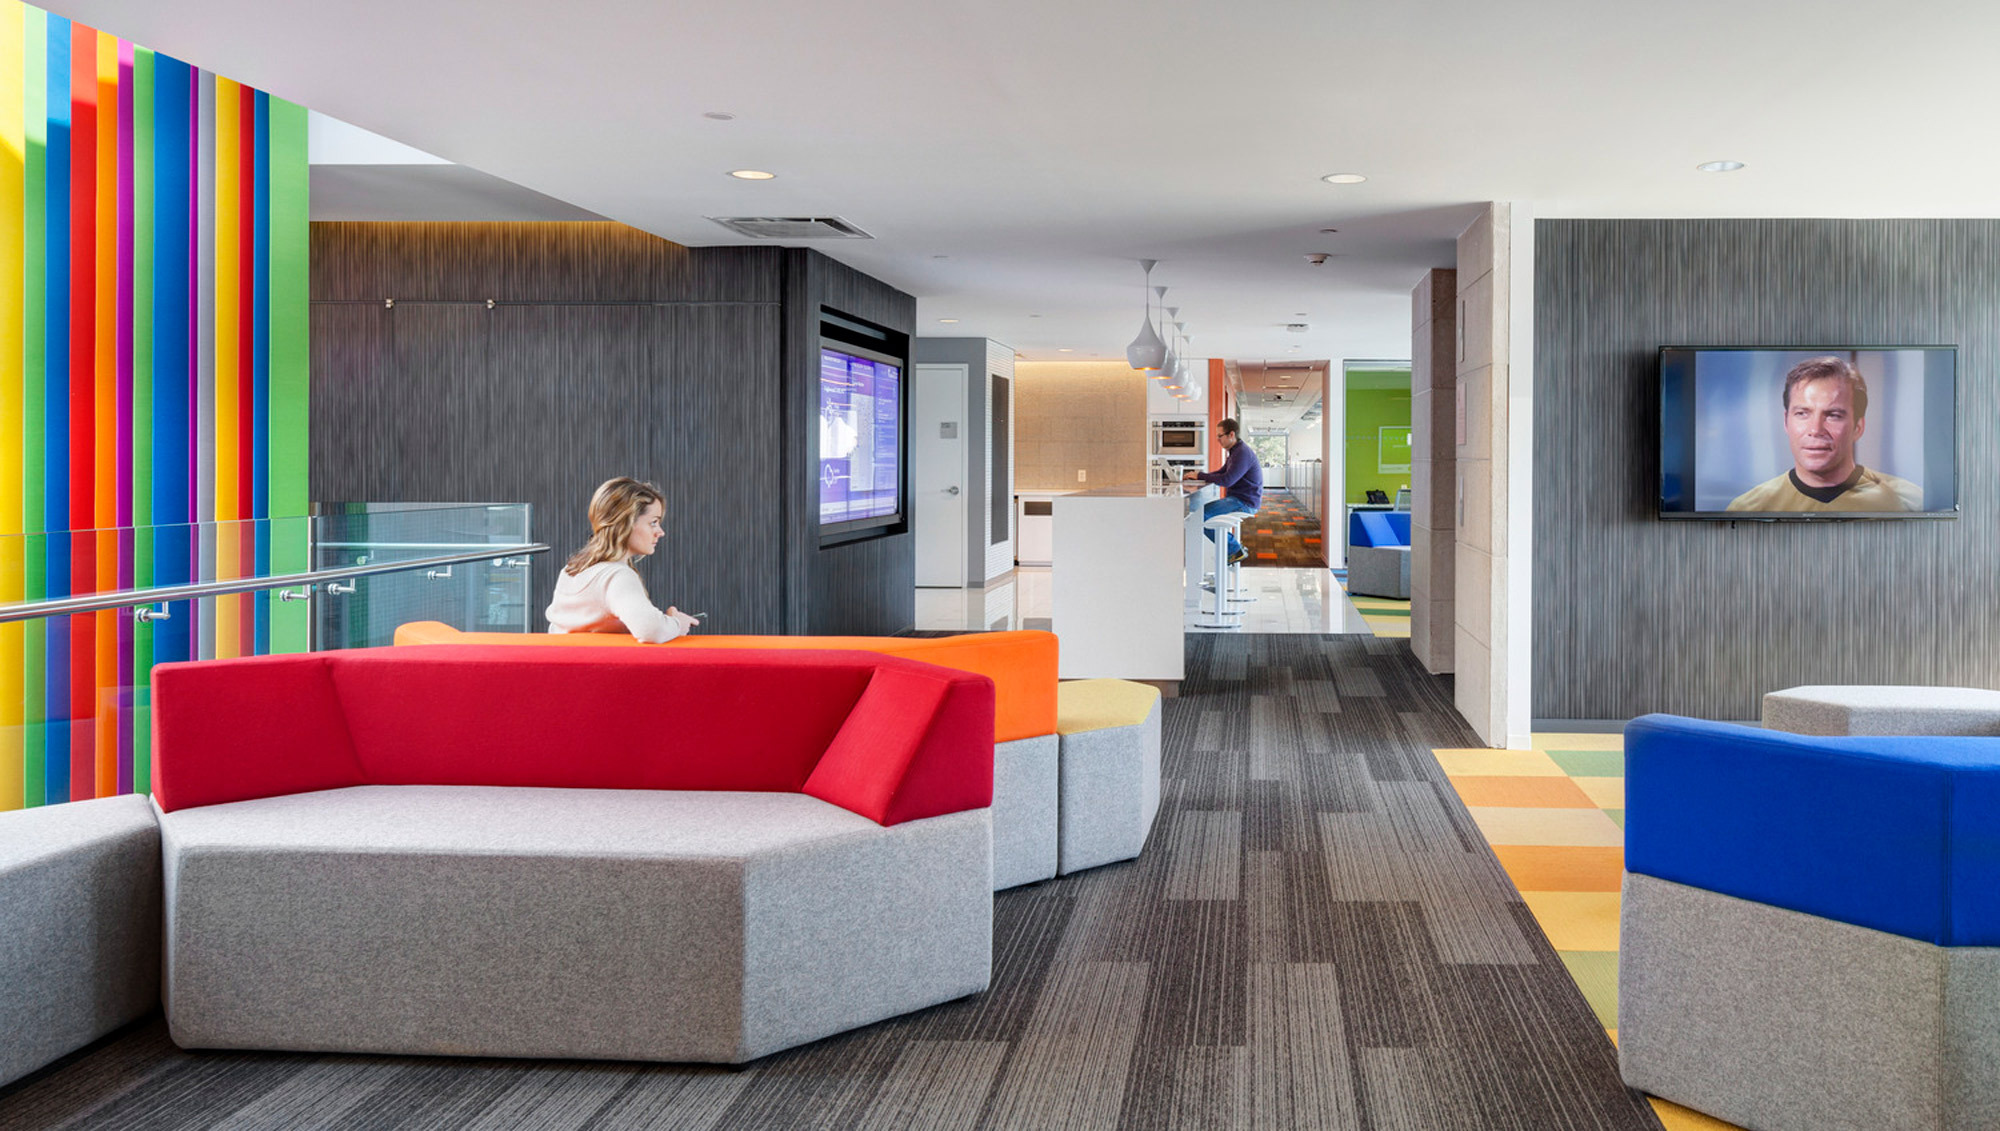 Modern open-plan office lounge featuring vibrant color-blocked accents, a red-orange modular sofa, and gray upholstered seating, set against subtle wood paneling and a lively carpet with geometric patterns. The space is casually divided with a partial floating wall hosting a television screen.